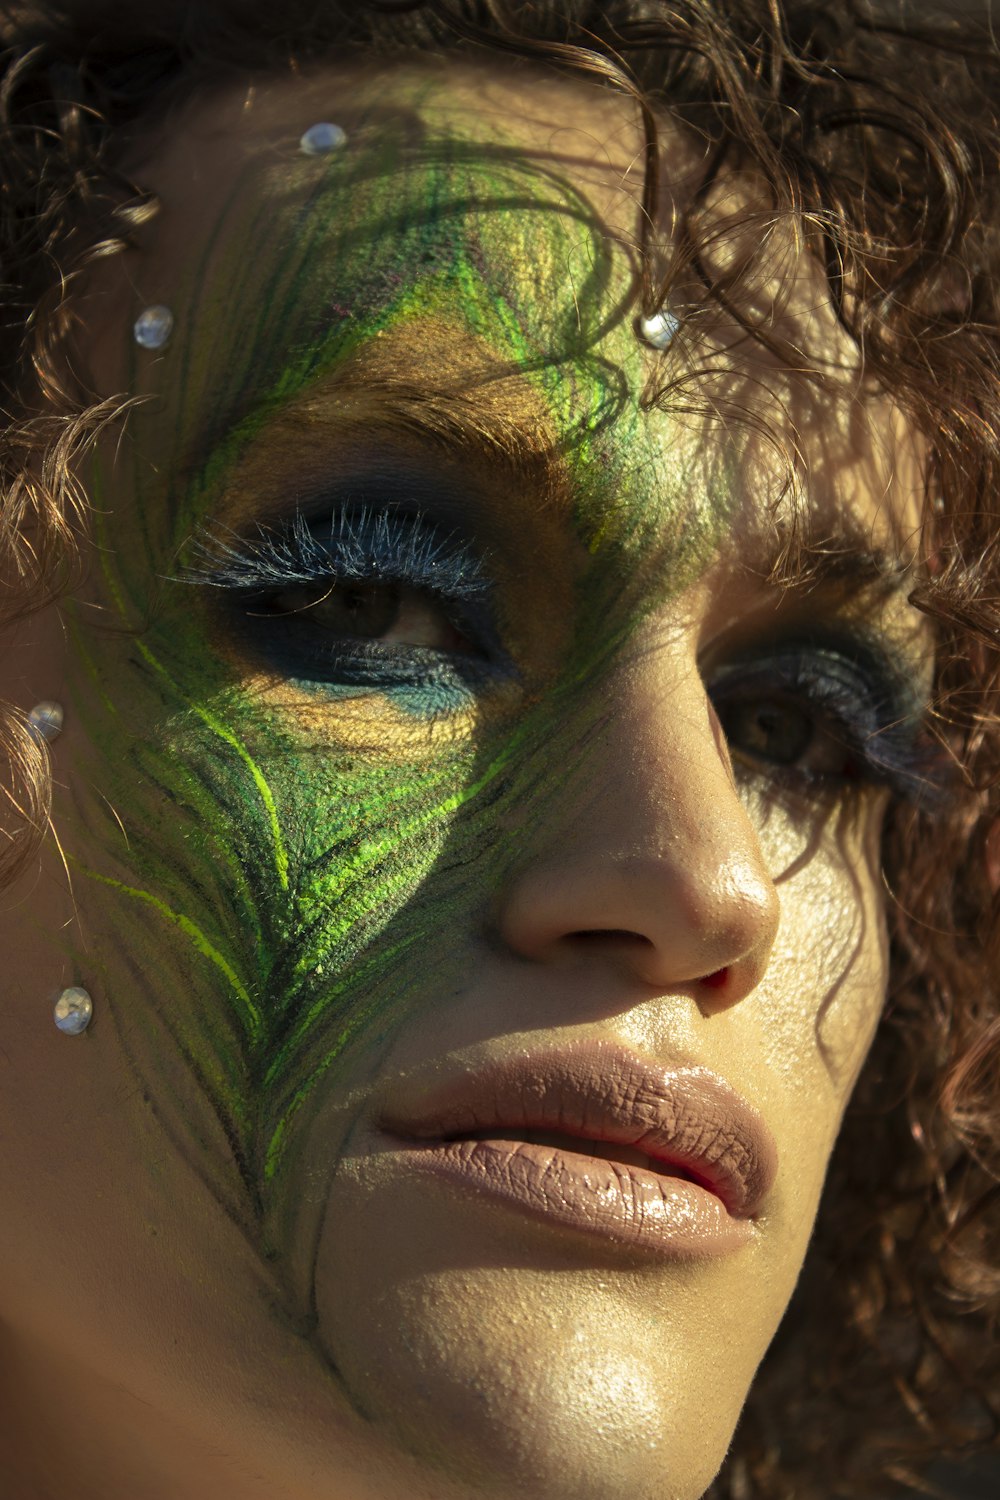 a close up of a woman's face with a green feather painted on her